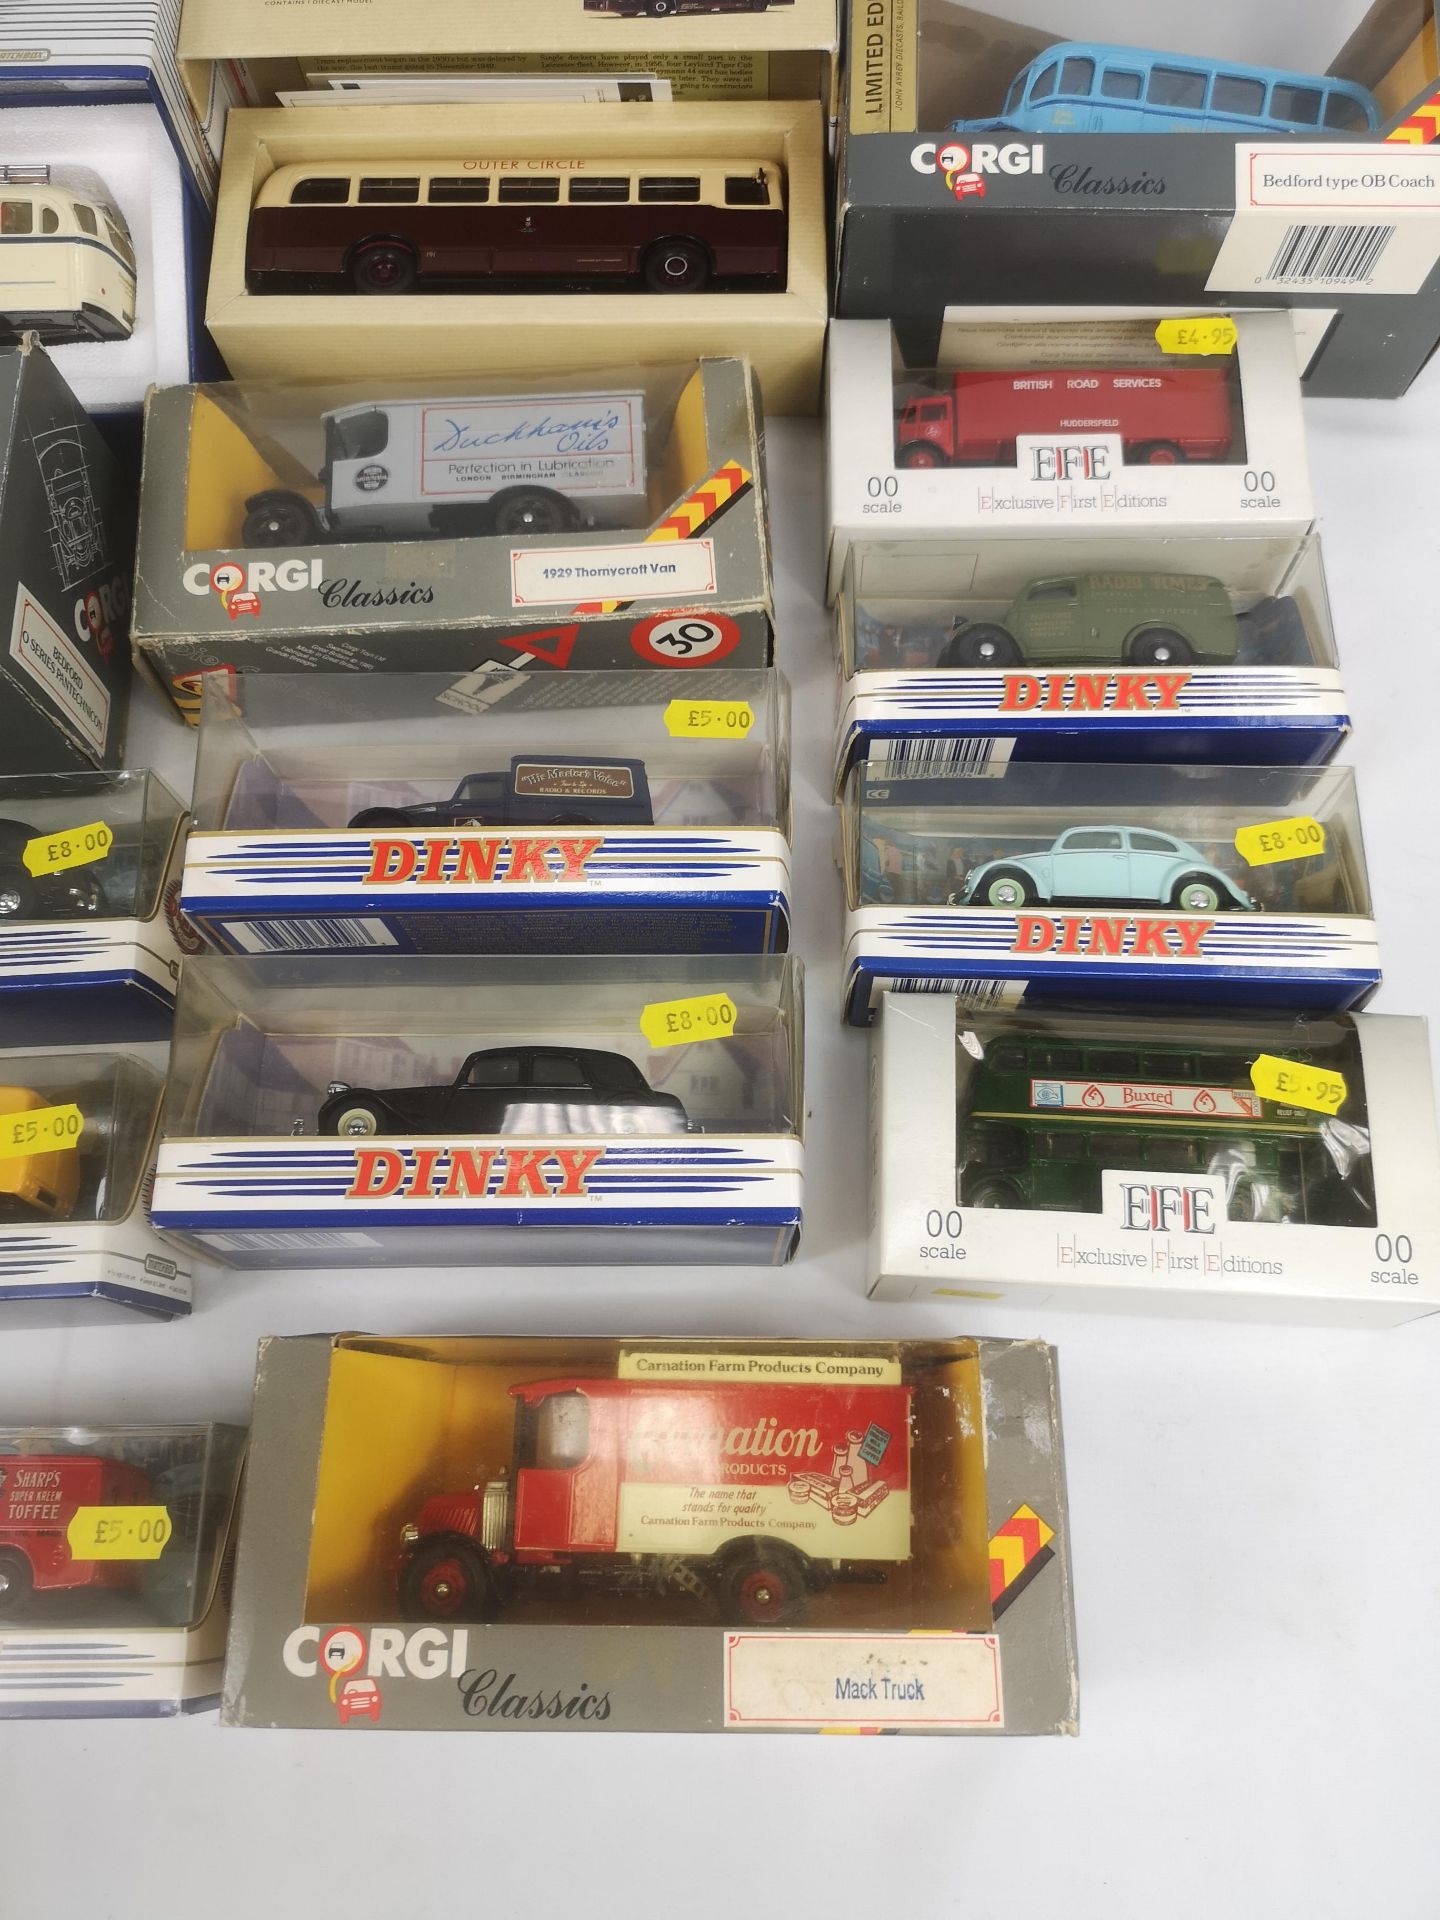 Ten Dinky diecast model vehicles together with a quantity of other diecast model vehicles - Image 4 of 4